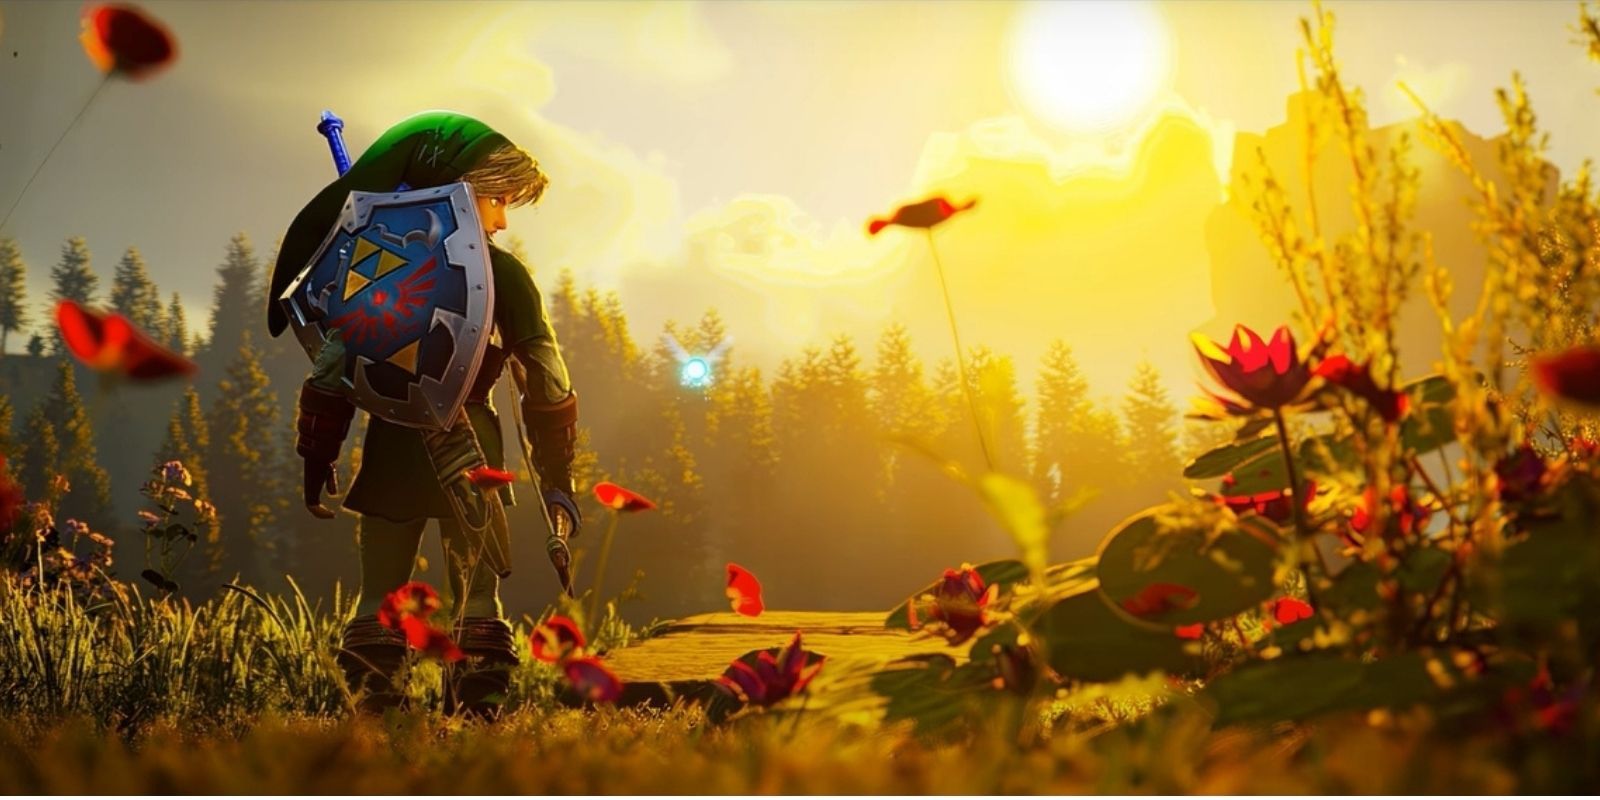 Zelda Fans Create Incredible Ocarina of Time Remake in Unreal Engine